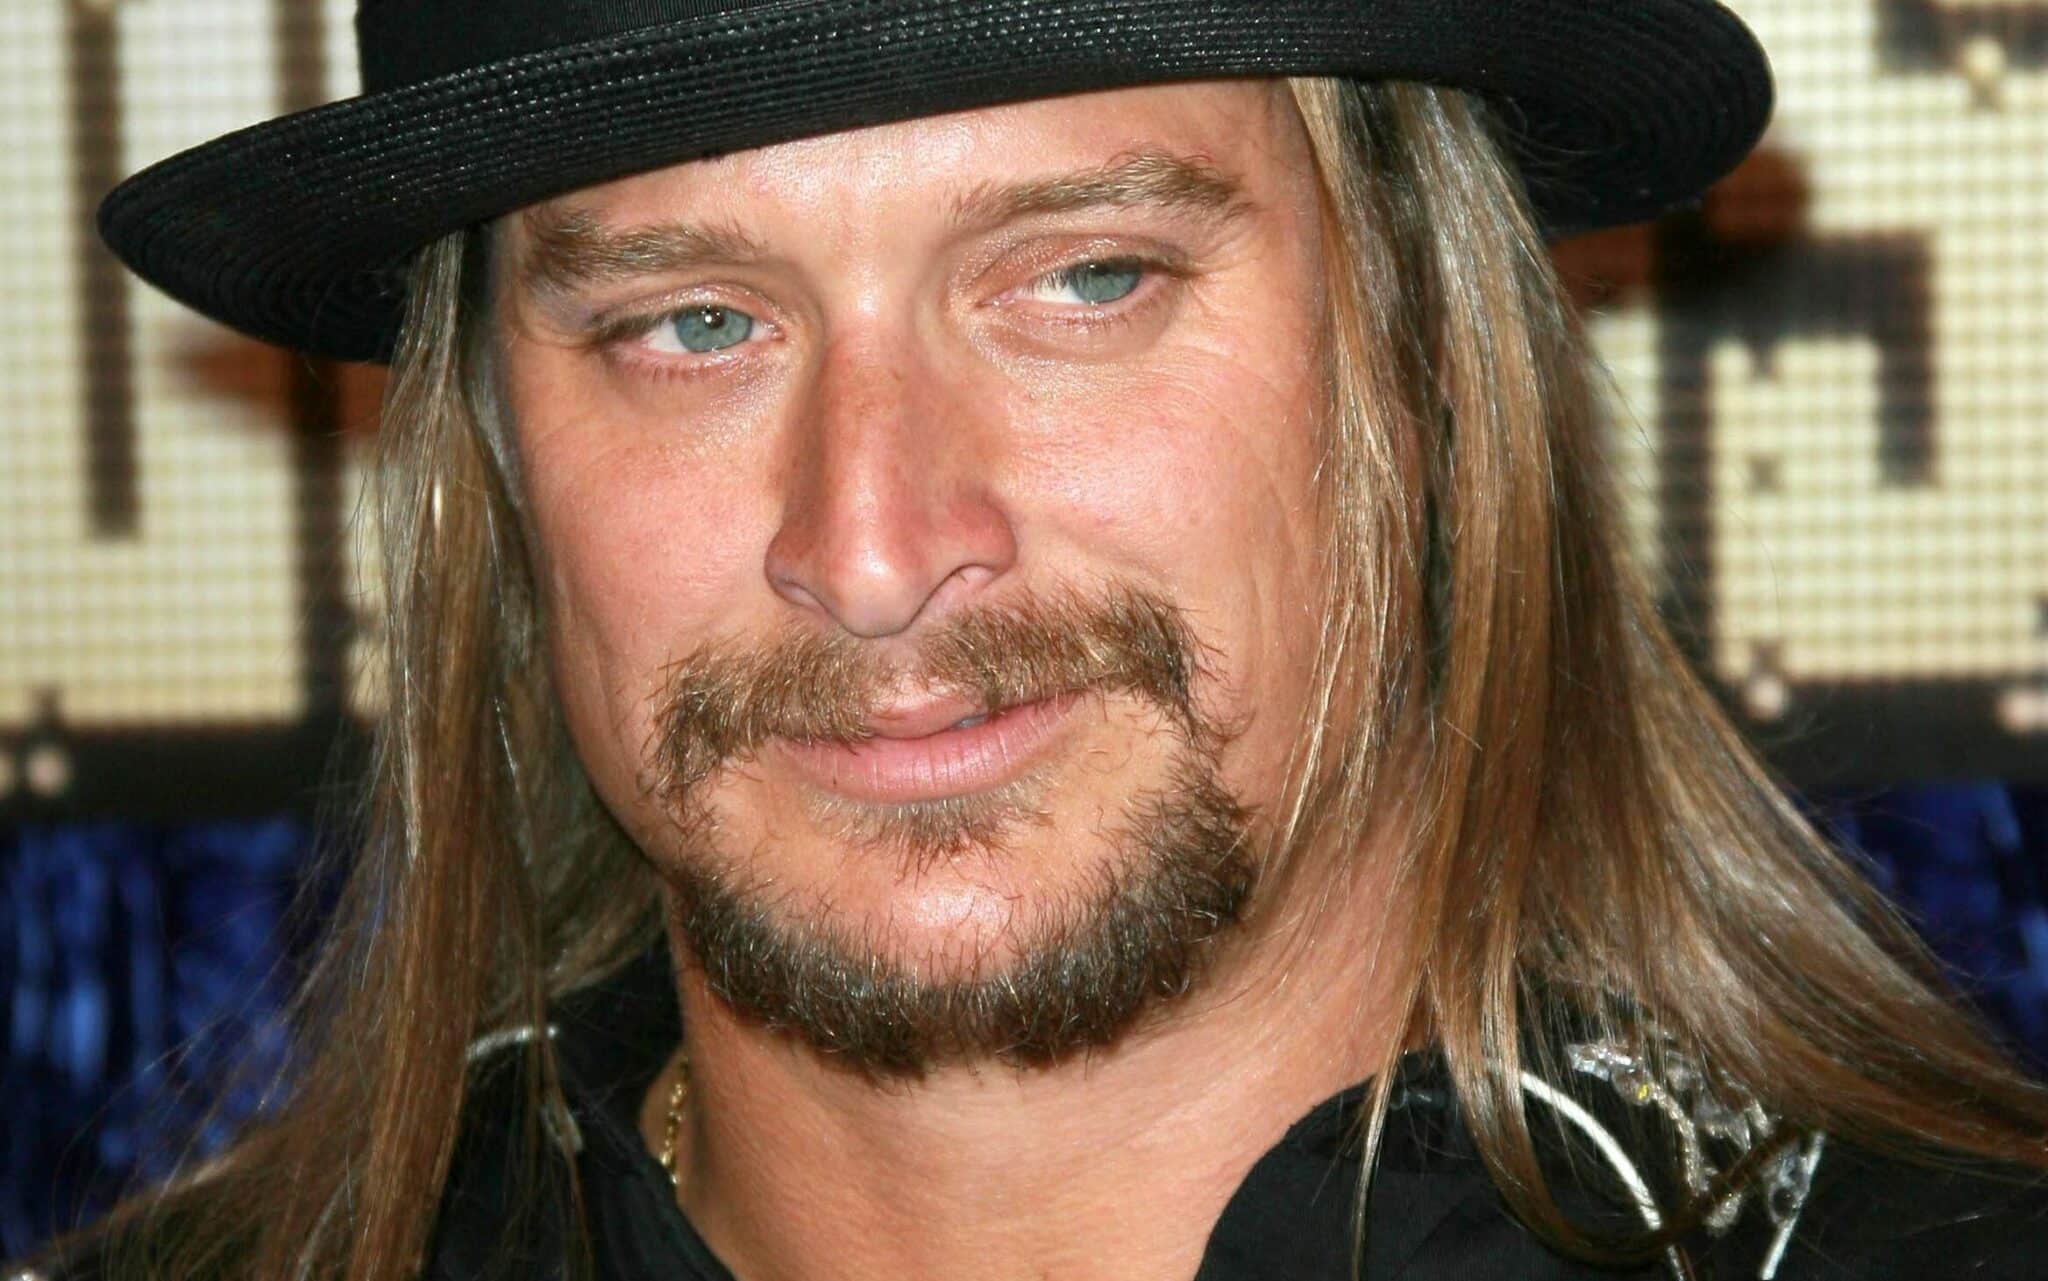 Kid Rock Arriving At The 2007 Mtv Video Music Awards.